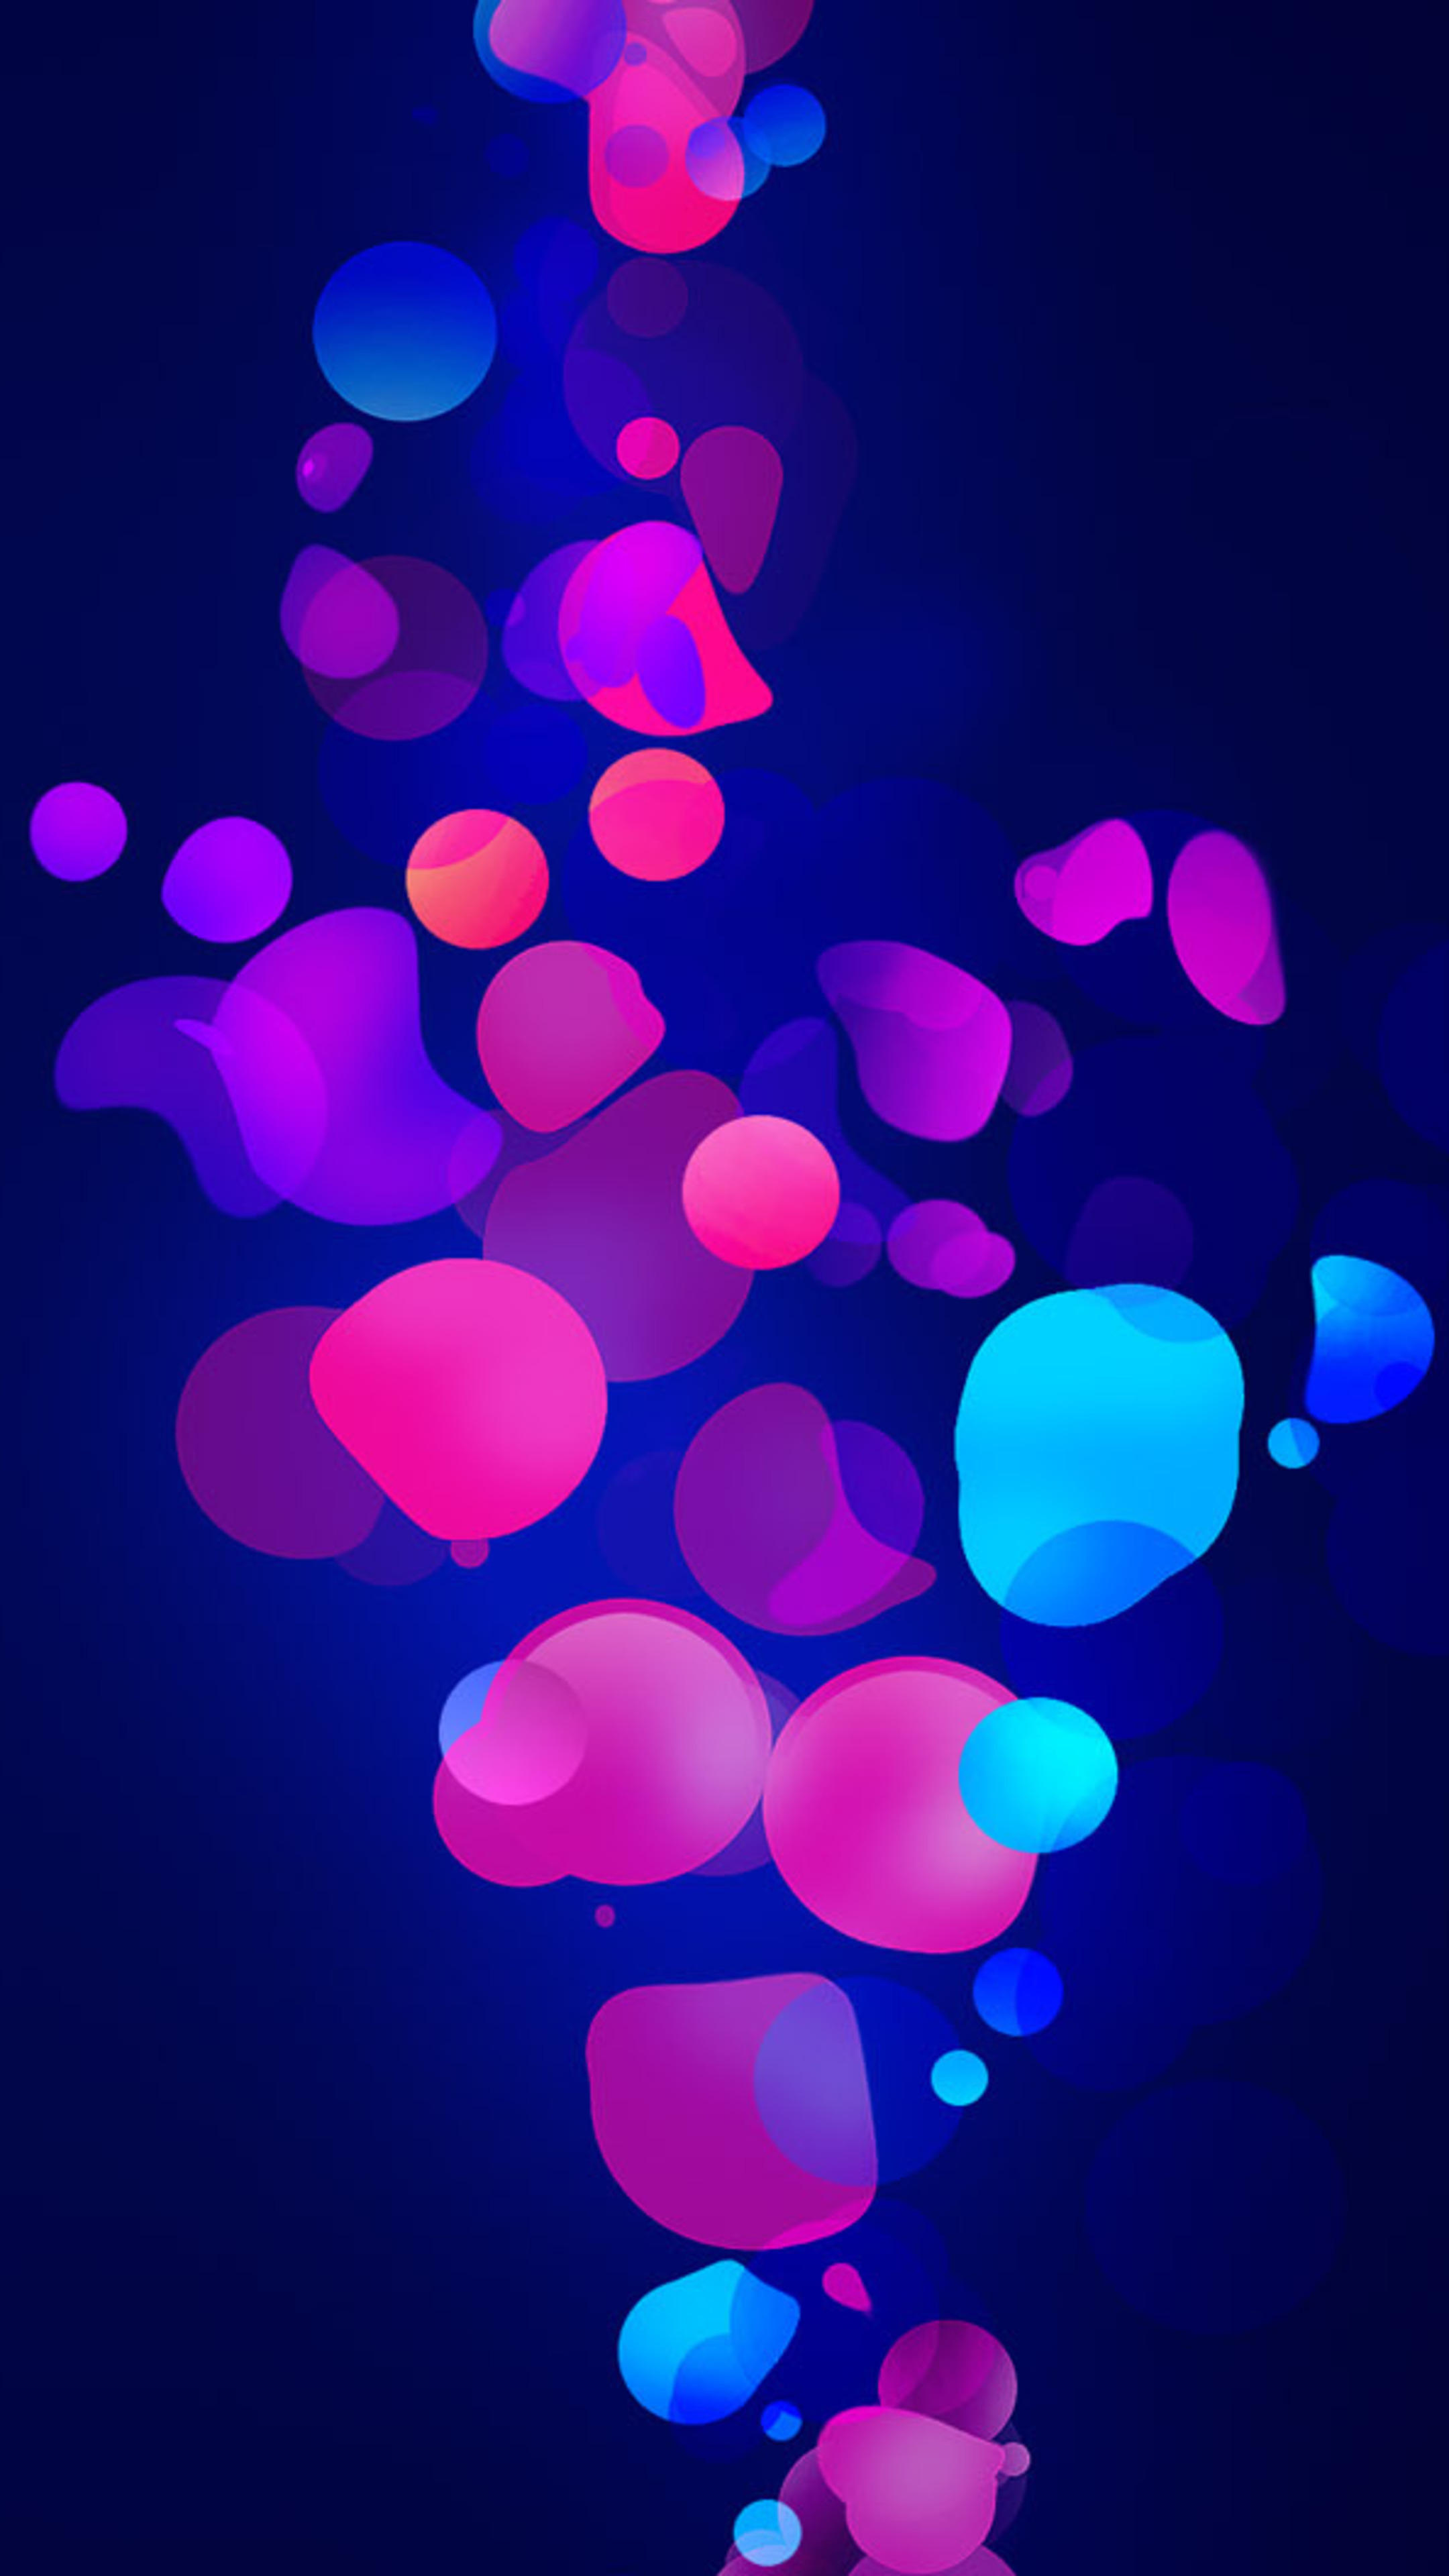 Backdrop: Abstract digital art, Multicolored round figures, Dark blue, Semi-transparent objects. 2160x3840 4K Background.